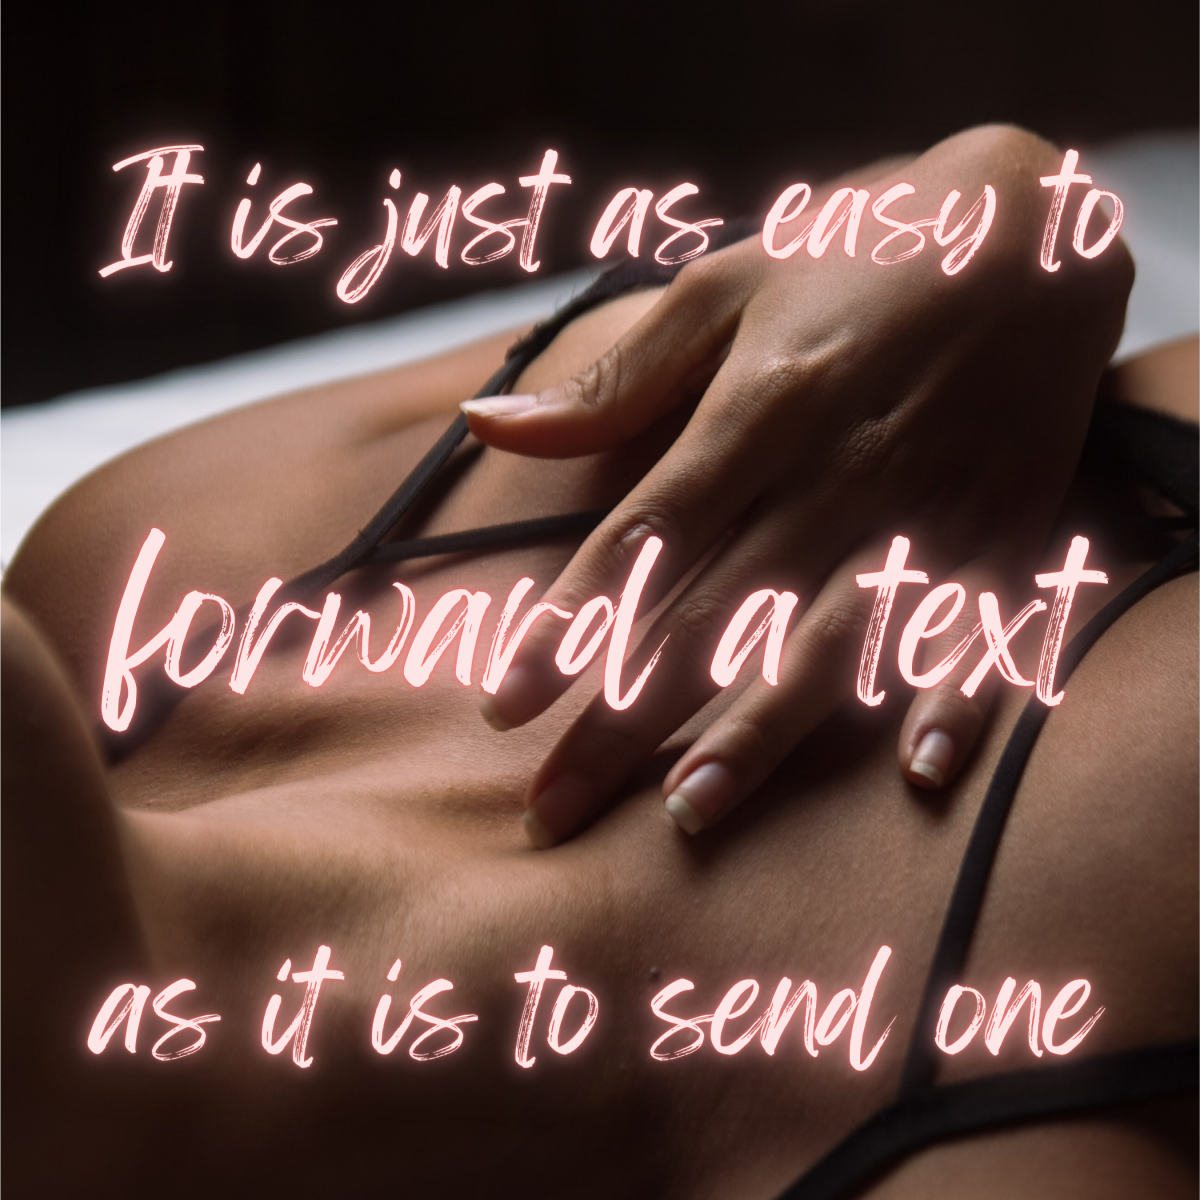 Sexting is something you do by choice. Being pressured into sending nude photos is not sexy, it's sexual exploitation.